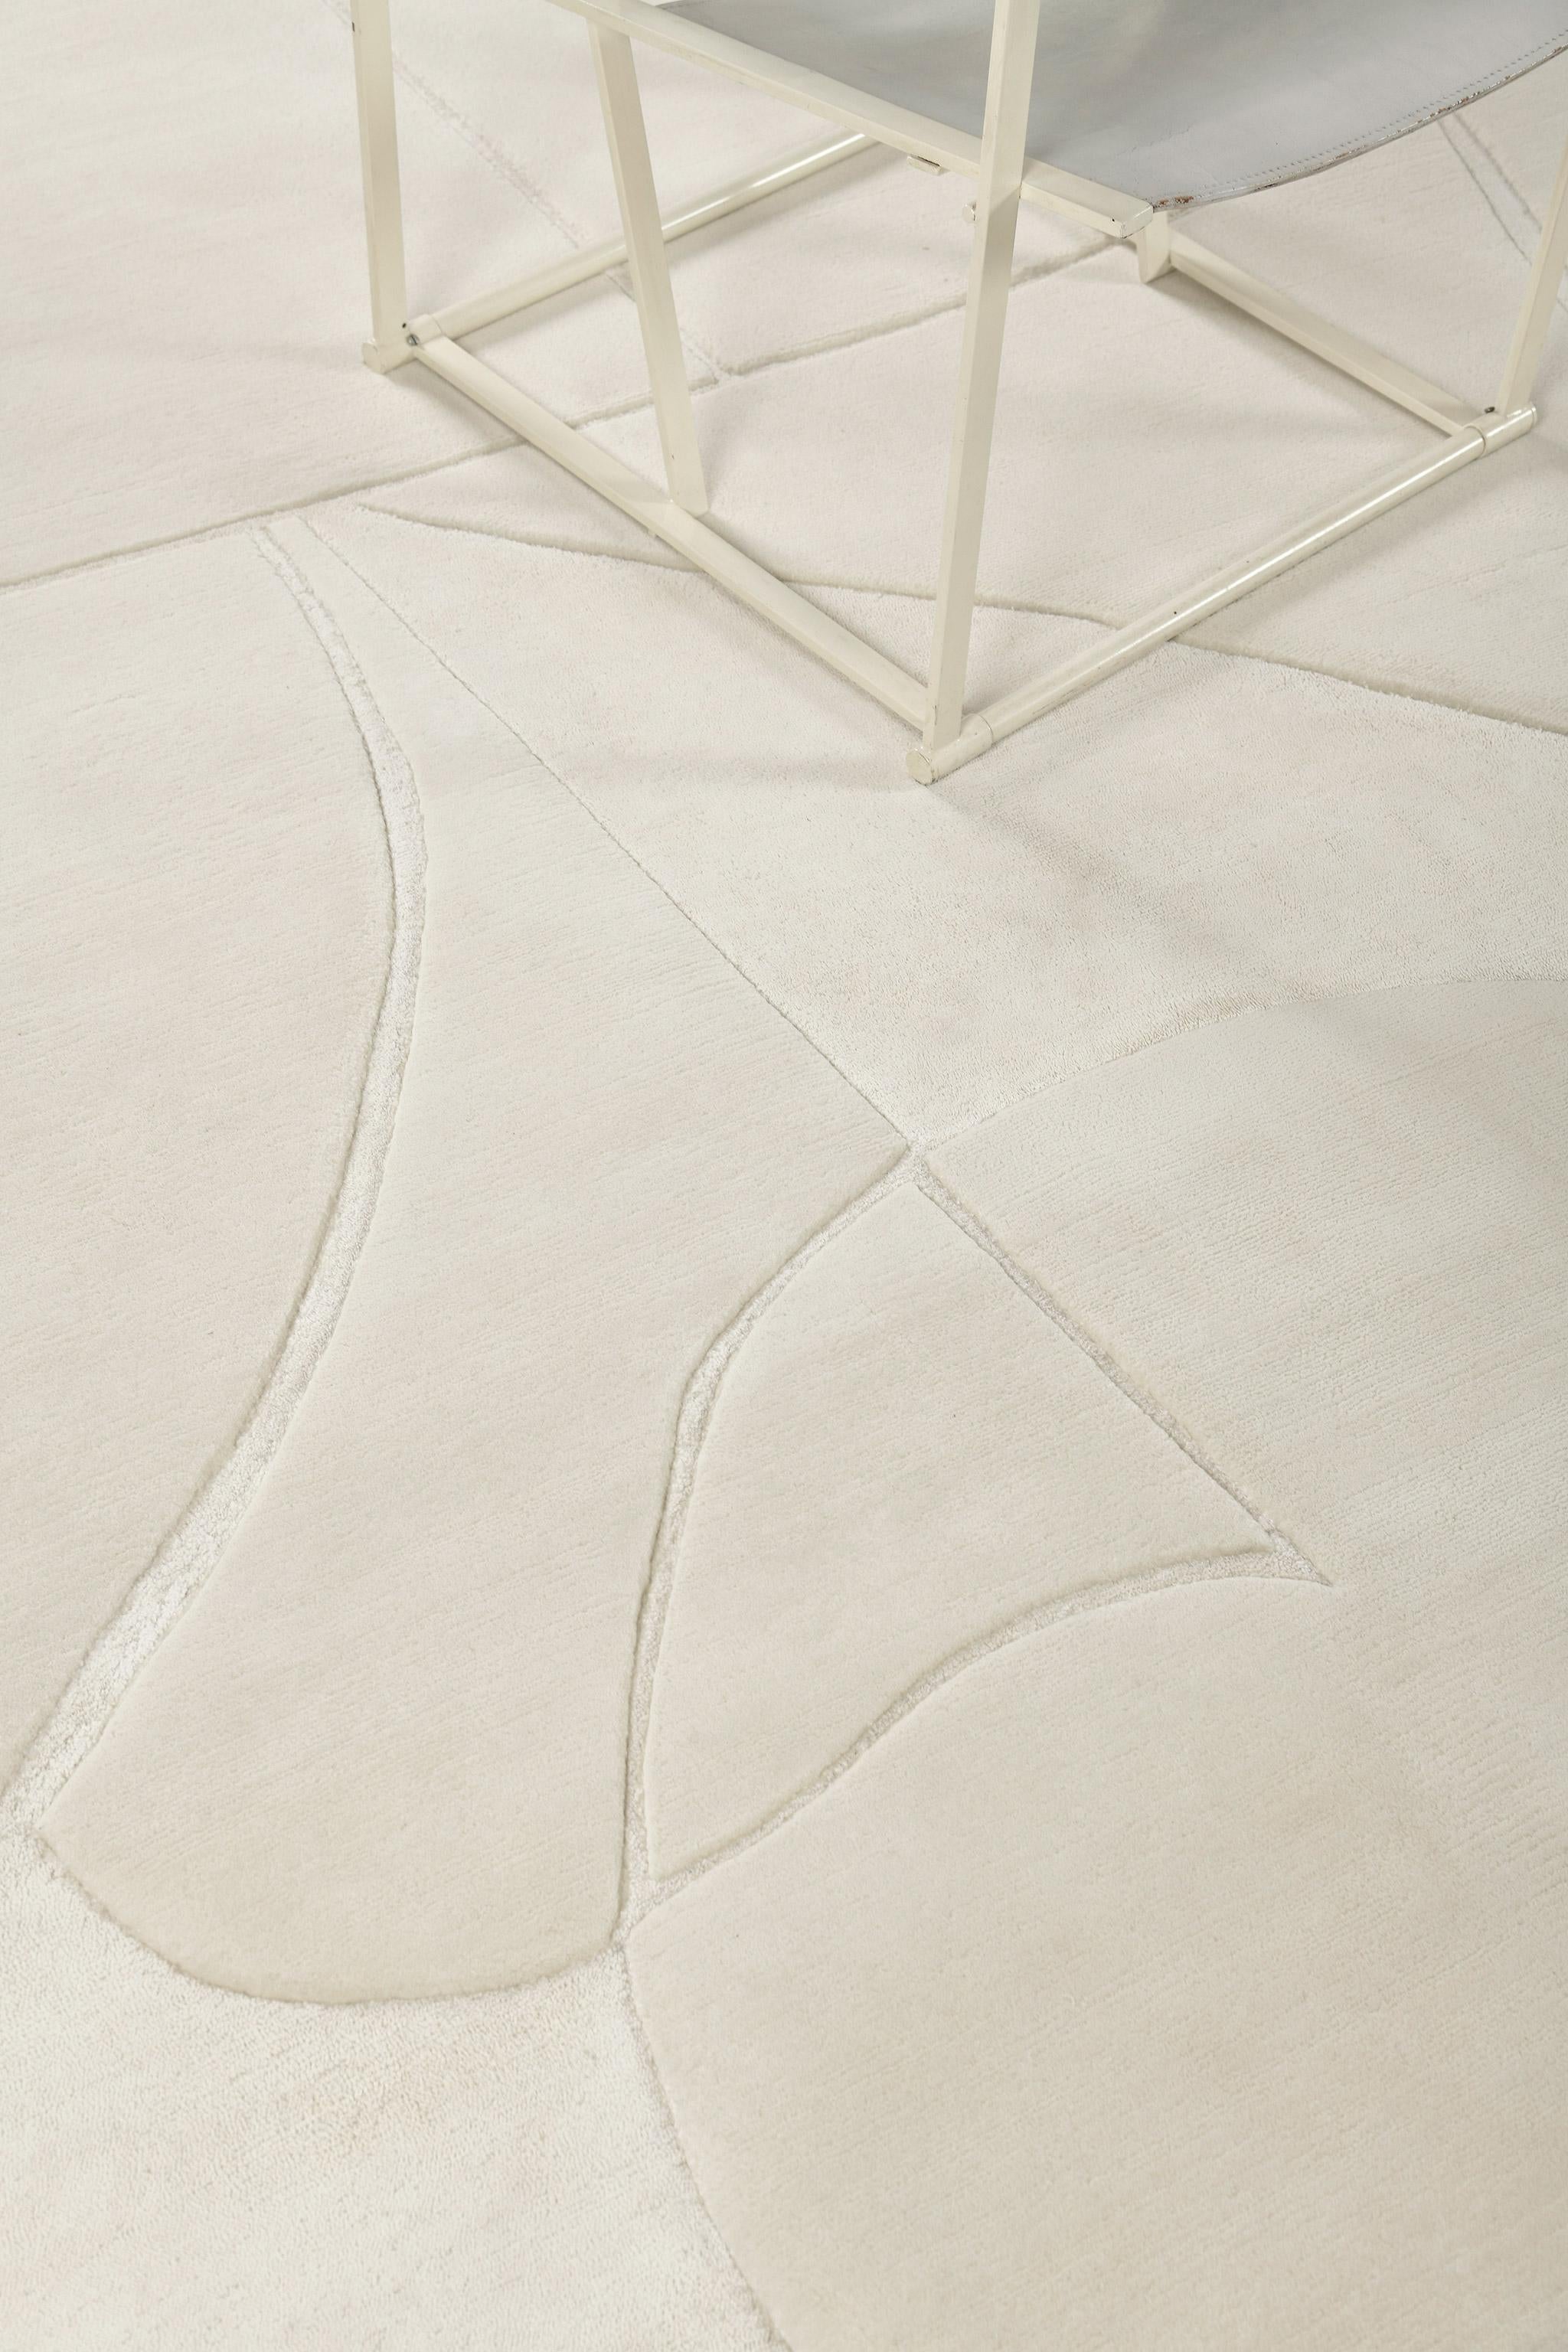 Toccato’ features stacked geometrical patterns depicting aesthetic artistry. It is a part of the Design Rhymes Collection which pulls inspiration from different aspects of architecture. This rug is rendered in the most soothing shade of ivory and